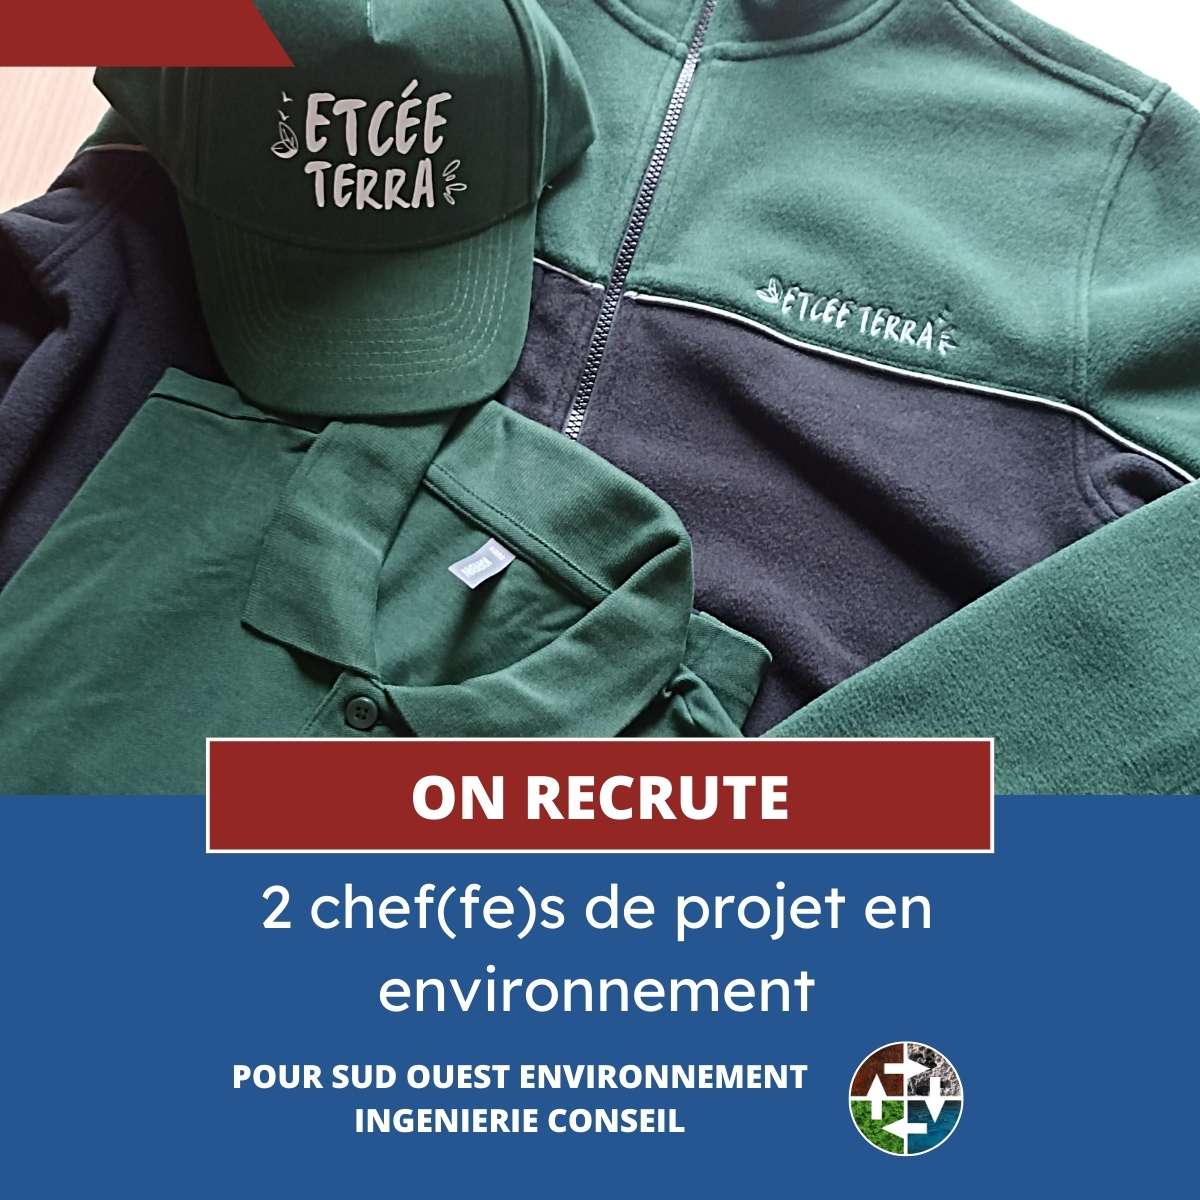 You are currently viewing 2 chef(fe)s de projet en environnement